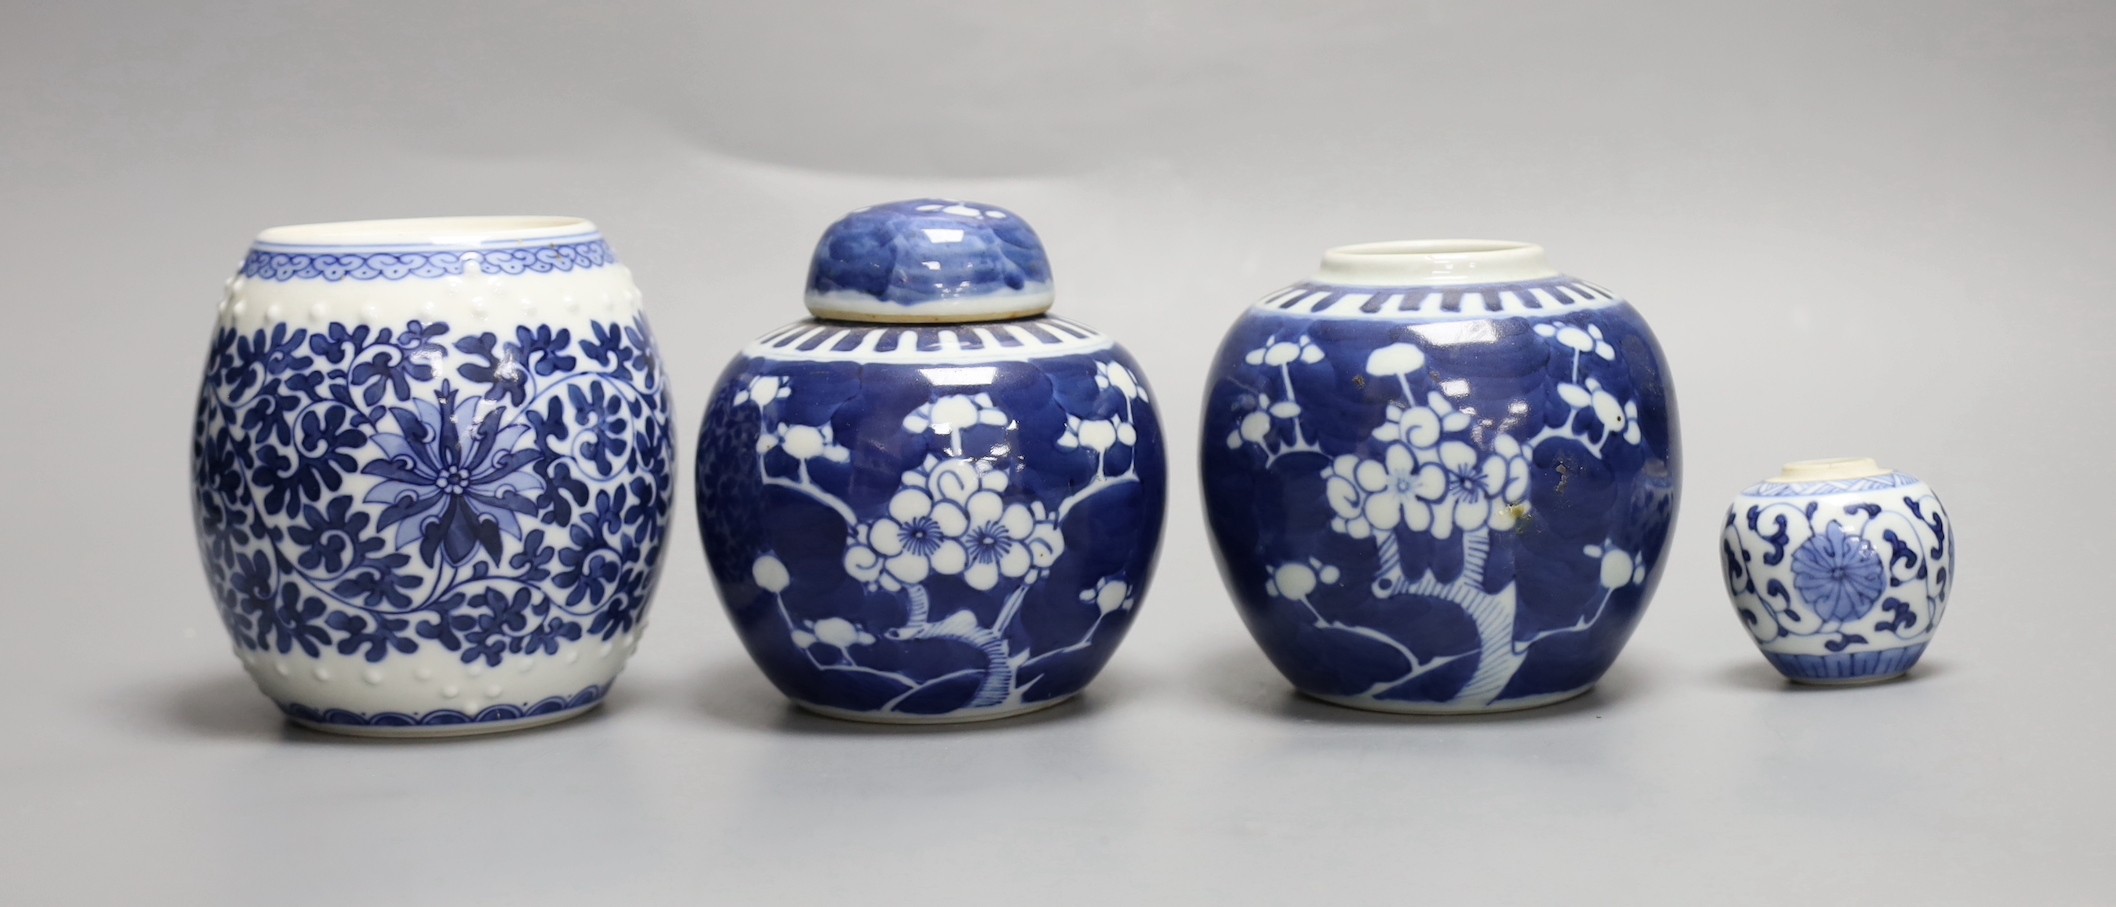 A pair of Chinese blue and white prunus jars, one with cover, a similar smaller jar and a ‘barrel’ jar